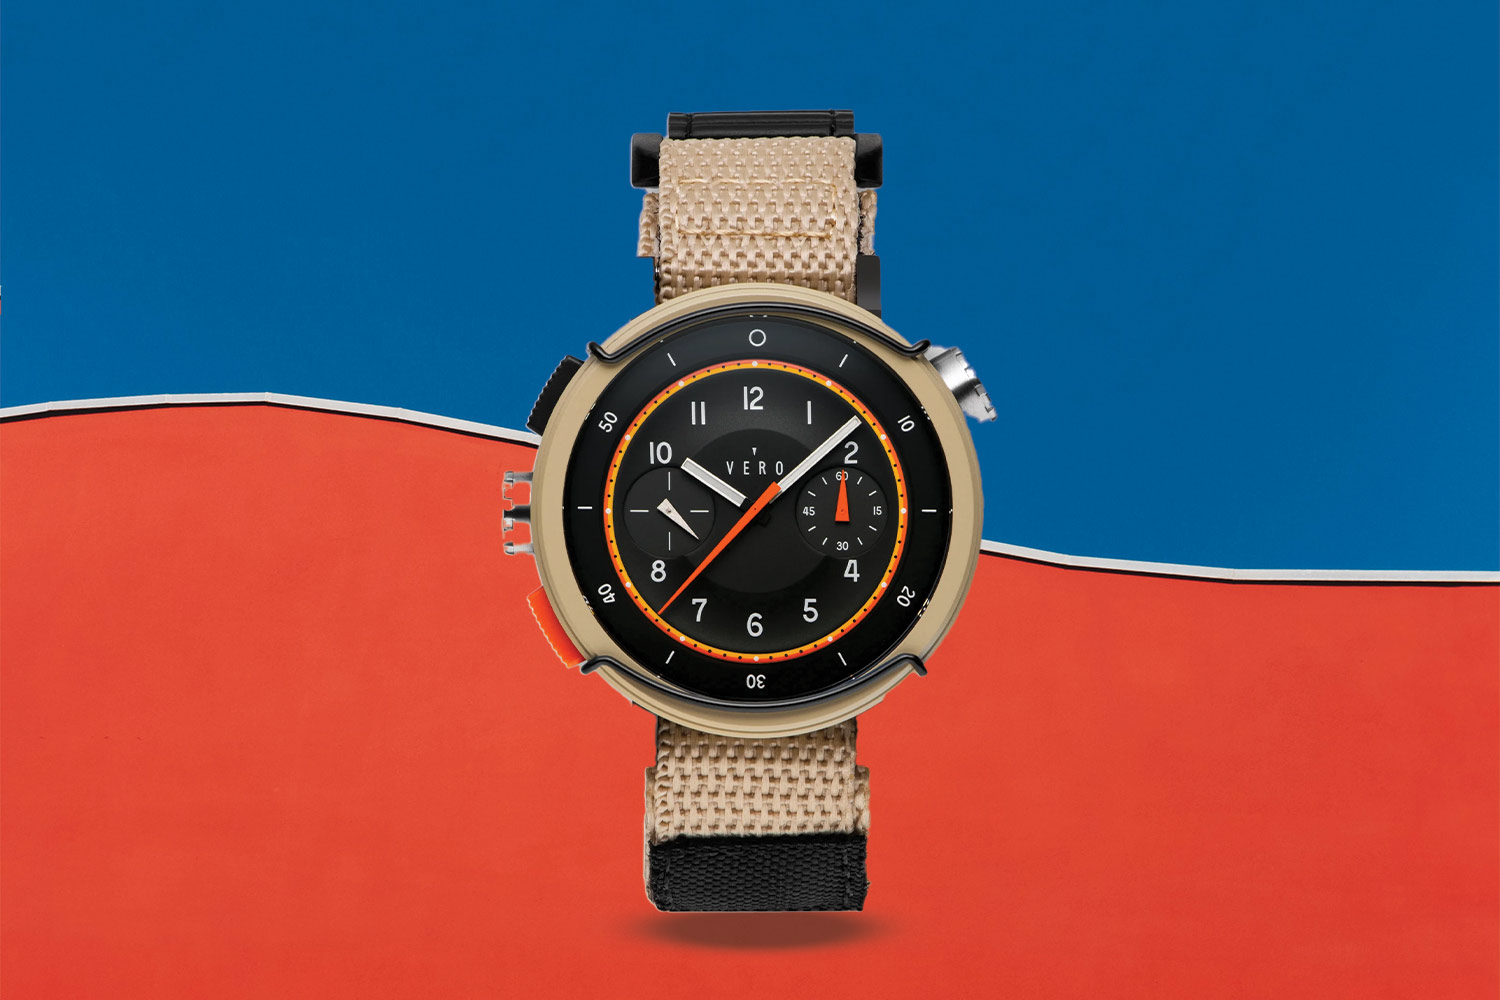 Brown and black watch